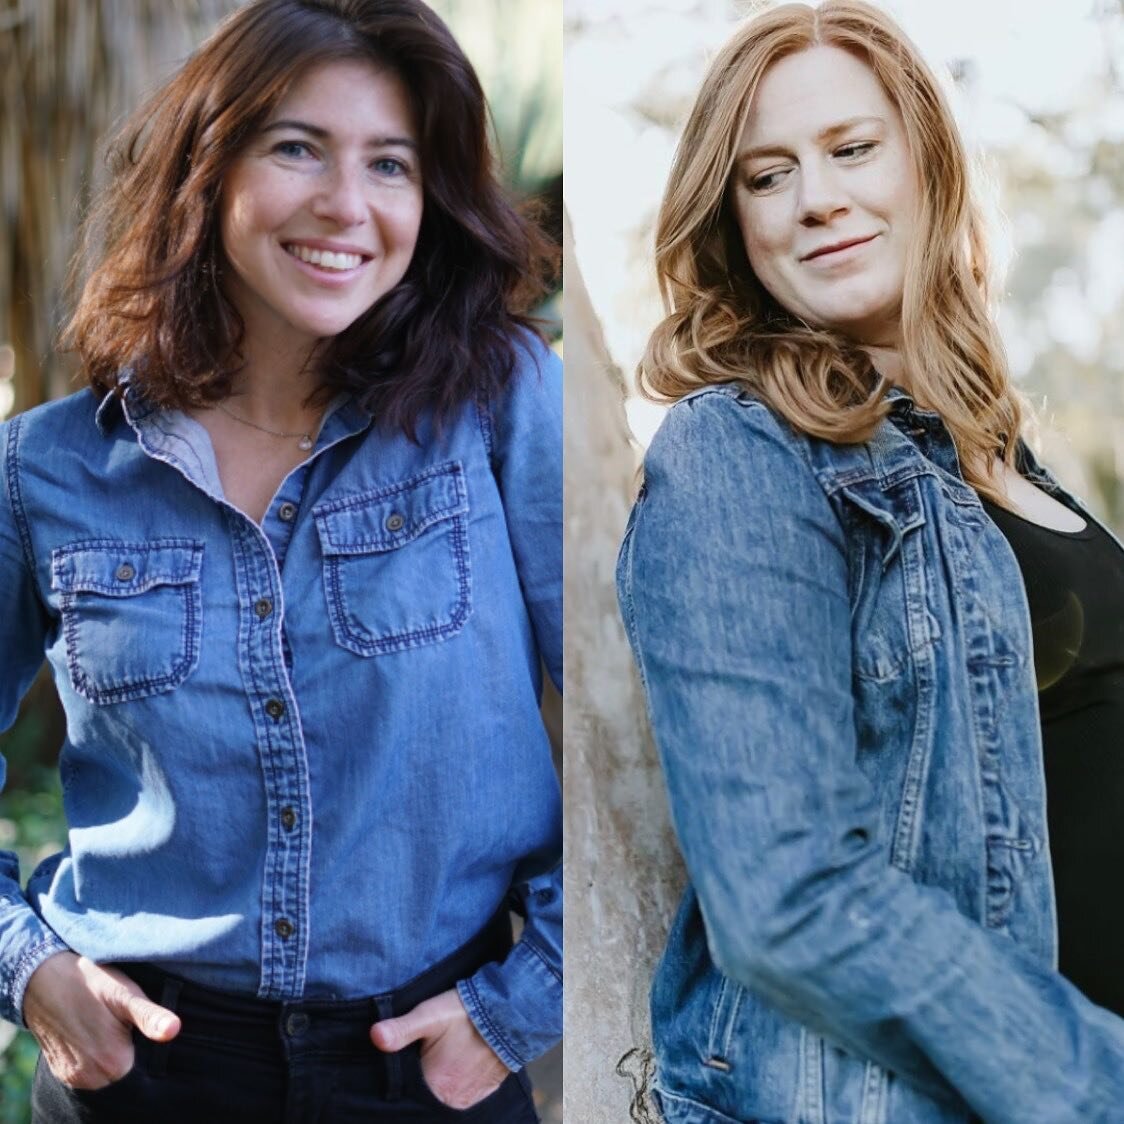 Catch @markamoms and myself go IG live tomorrow at 1PM PST! So much to discuss!

What do these 2 women in denim have in common?😄

💥 Both Doctors of Physical of Therapy with 10+ years of experience.
💥 Both mamas of 2 cute kiddos 
💥 Classmates for 